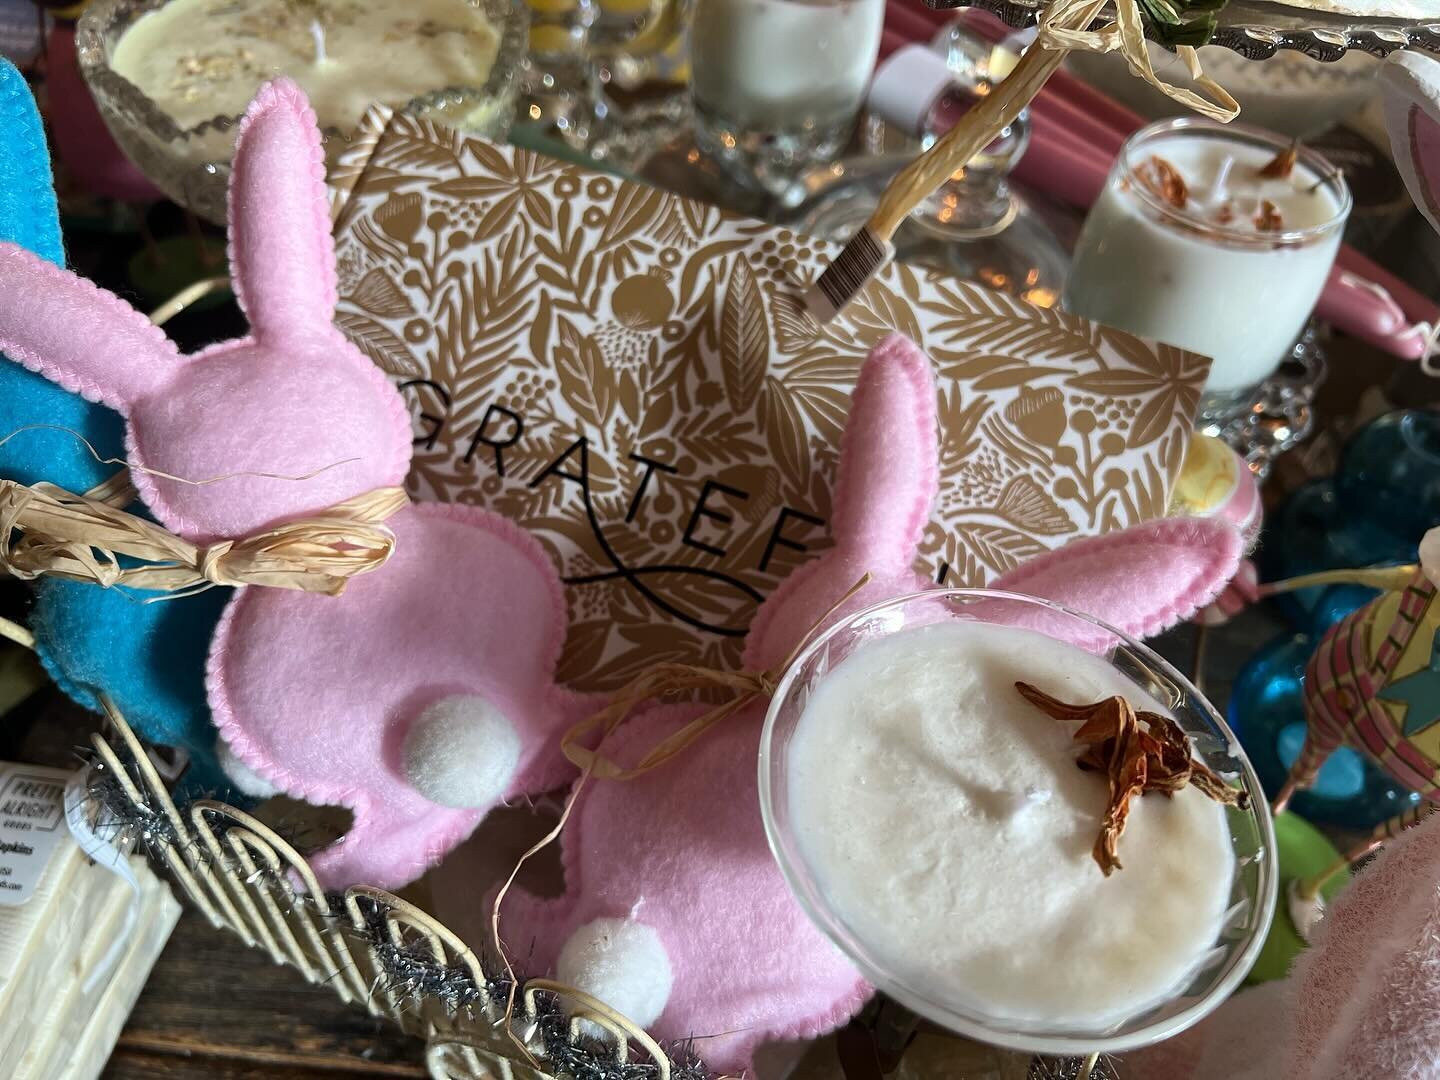 Did you fill your Easter baskets yet? Or get a hostess gift? We have so many ideas for you. Pop by today from 11-5. Saturday and Sunday 10-5. We will be open Monday too. Plus everyday until Easter. 914-763-1310
#vintage #vintageshop #shoppoundridge #